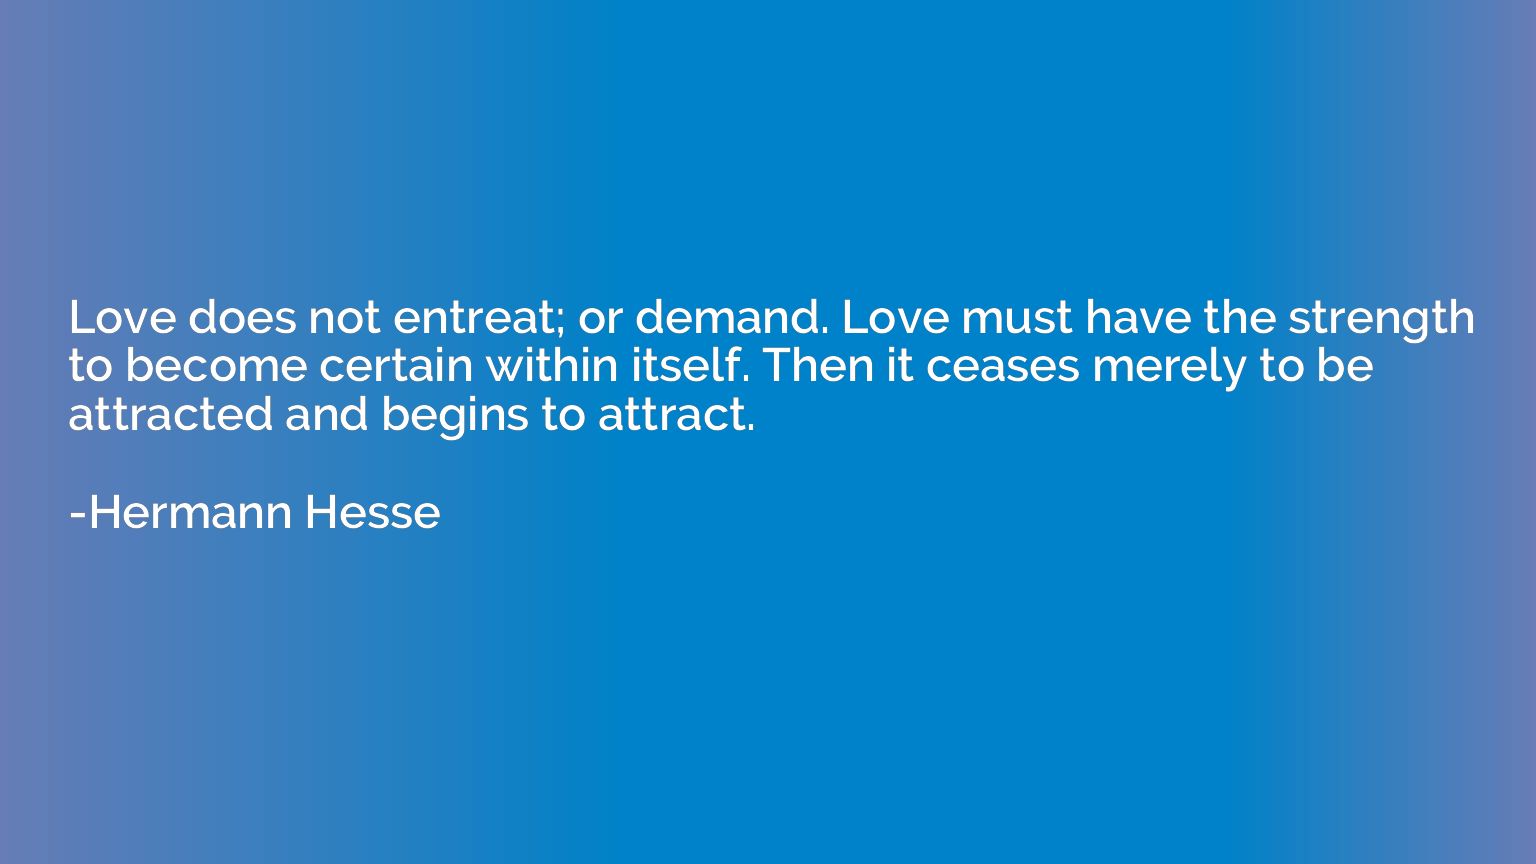 Love does not entreat; or demand. Love must have the strengt